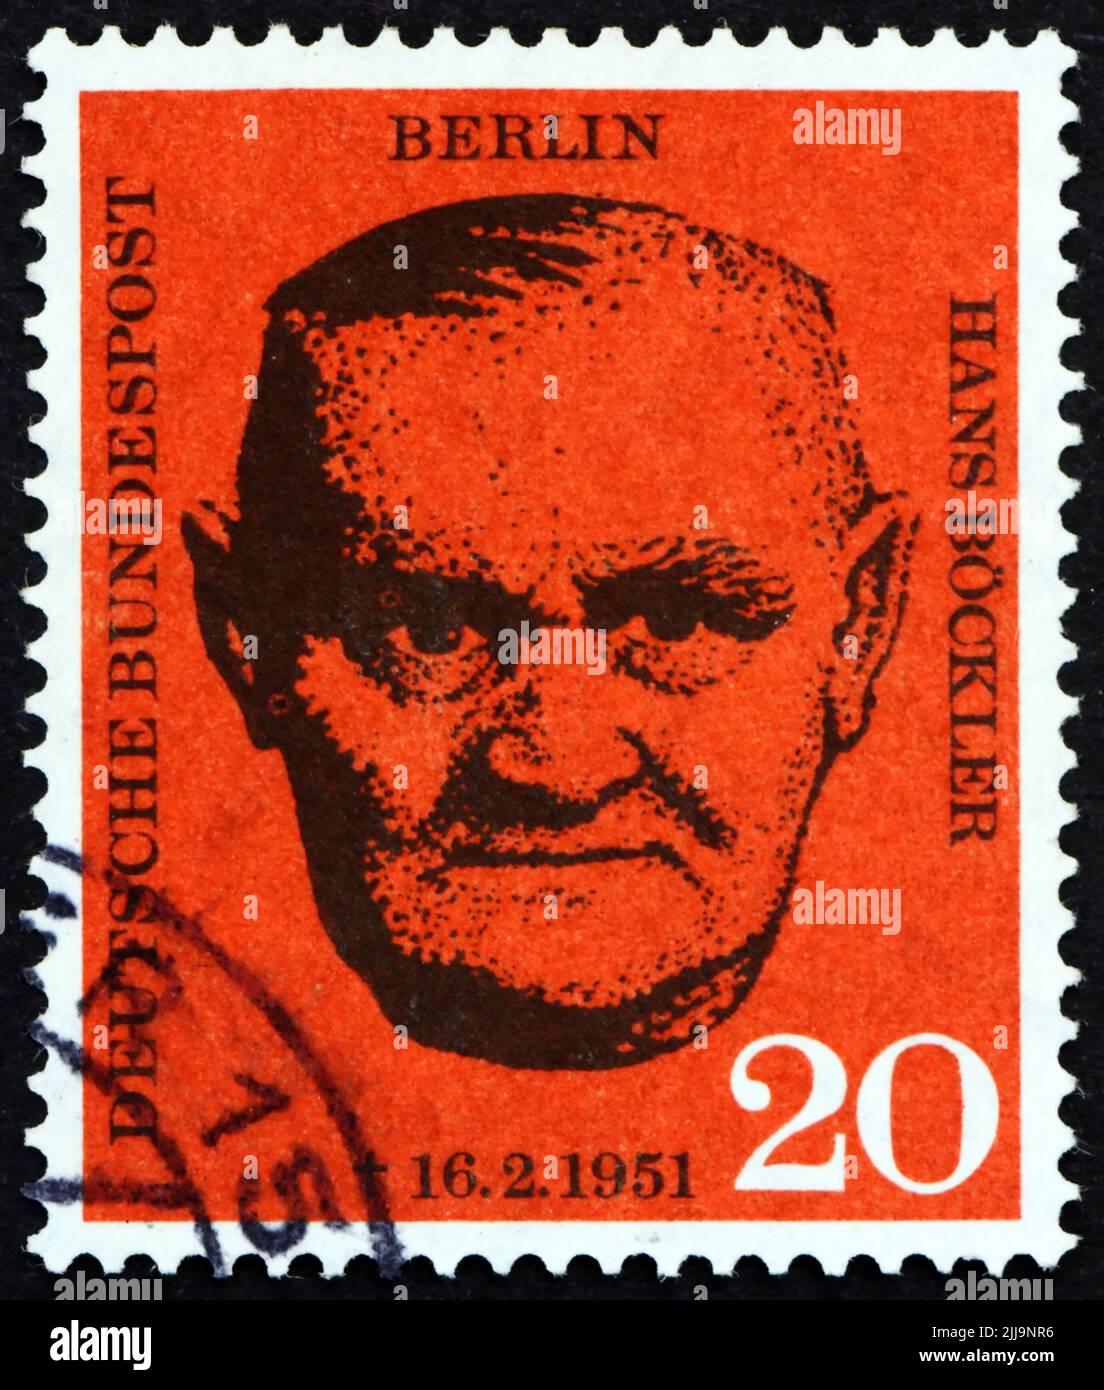 GERMANY - CIRCA 1960: a stamp printed in Germany, Berlin shows Hans Bockler, German Politician and Workers' Union Leader, circa 1960 Stock Photo